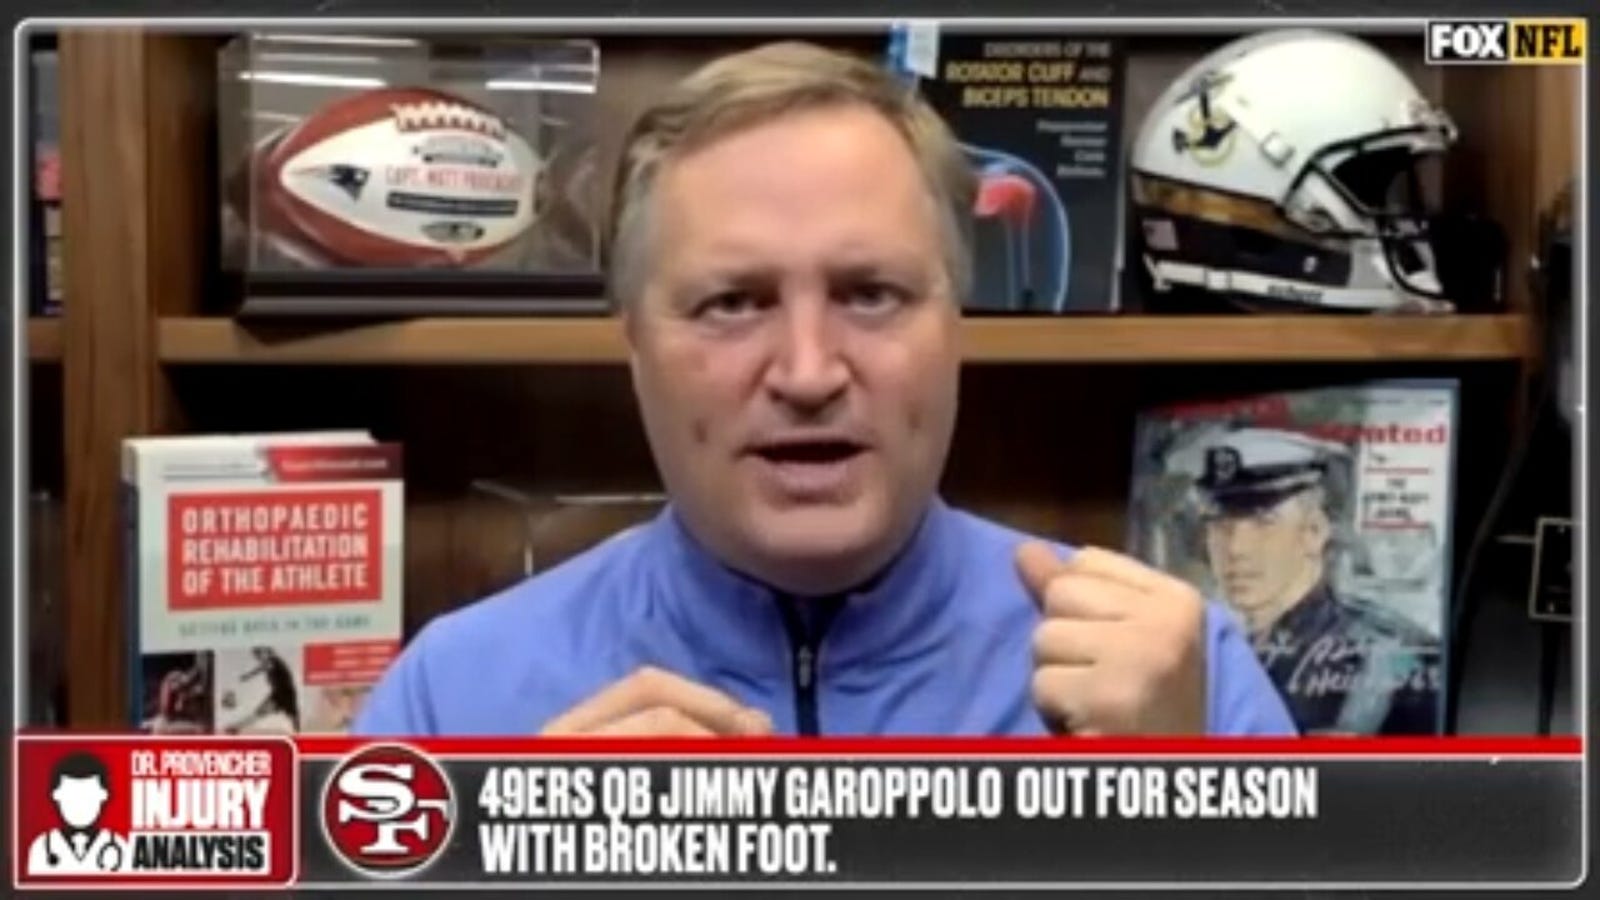 Dr. Matt Provencher reacts 49ers QB Jimmy Garoppolo breaking his foot against the Dolphins and gives a timetable for his return.